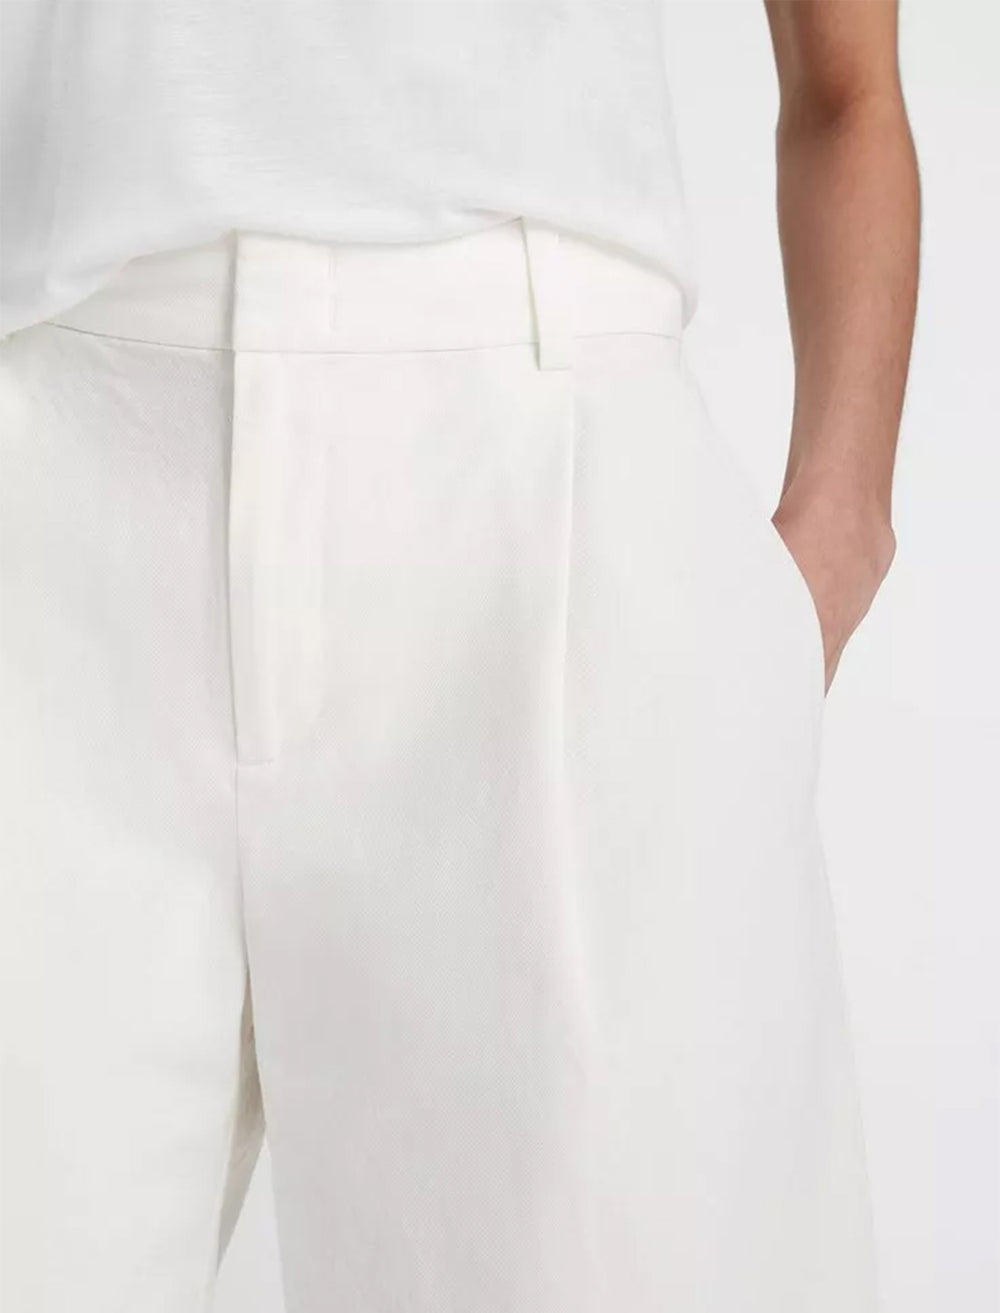 washed cotton short in off white (2)